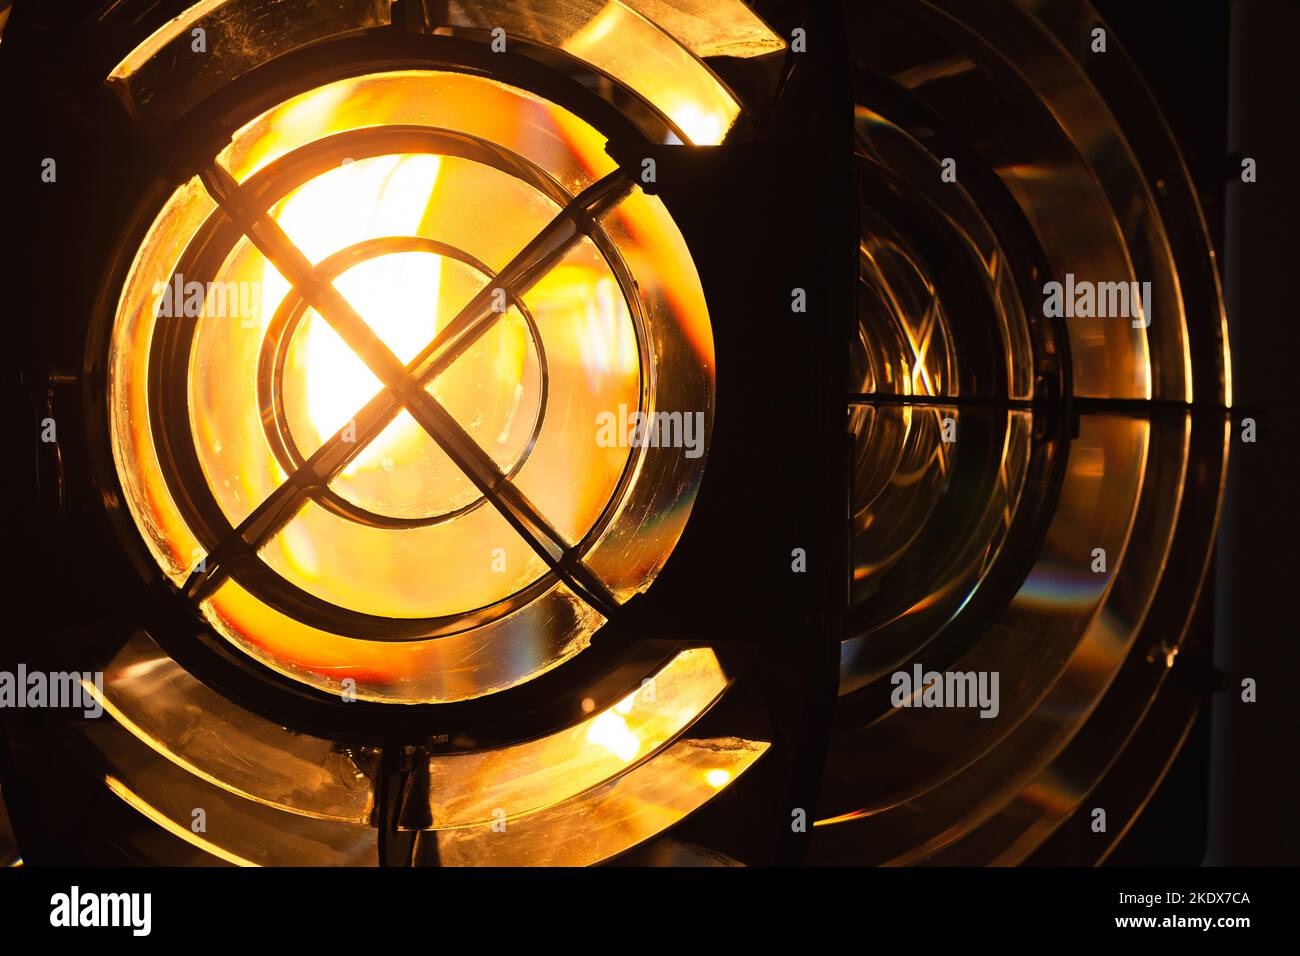 Glowing yellow lighthouse lamp with a Fresnel lens. It is a type of composite compact lens developed by the French physicist Augustin-Jean Fresnel for Stock Photo